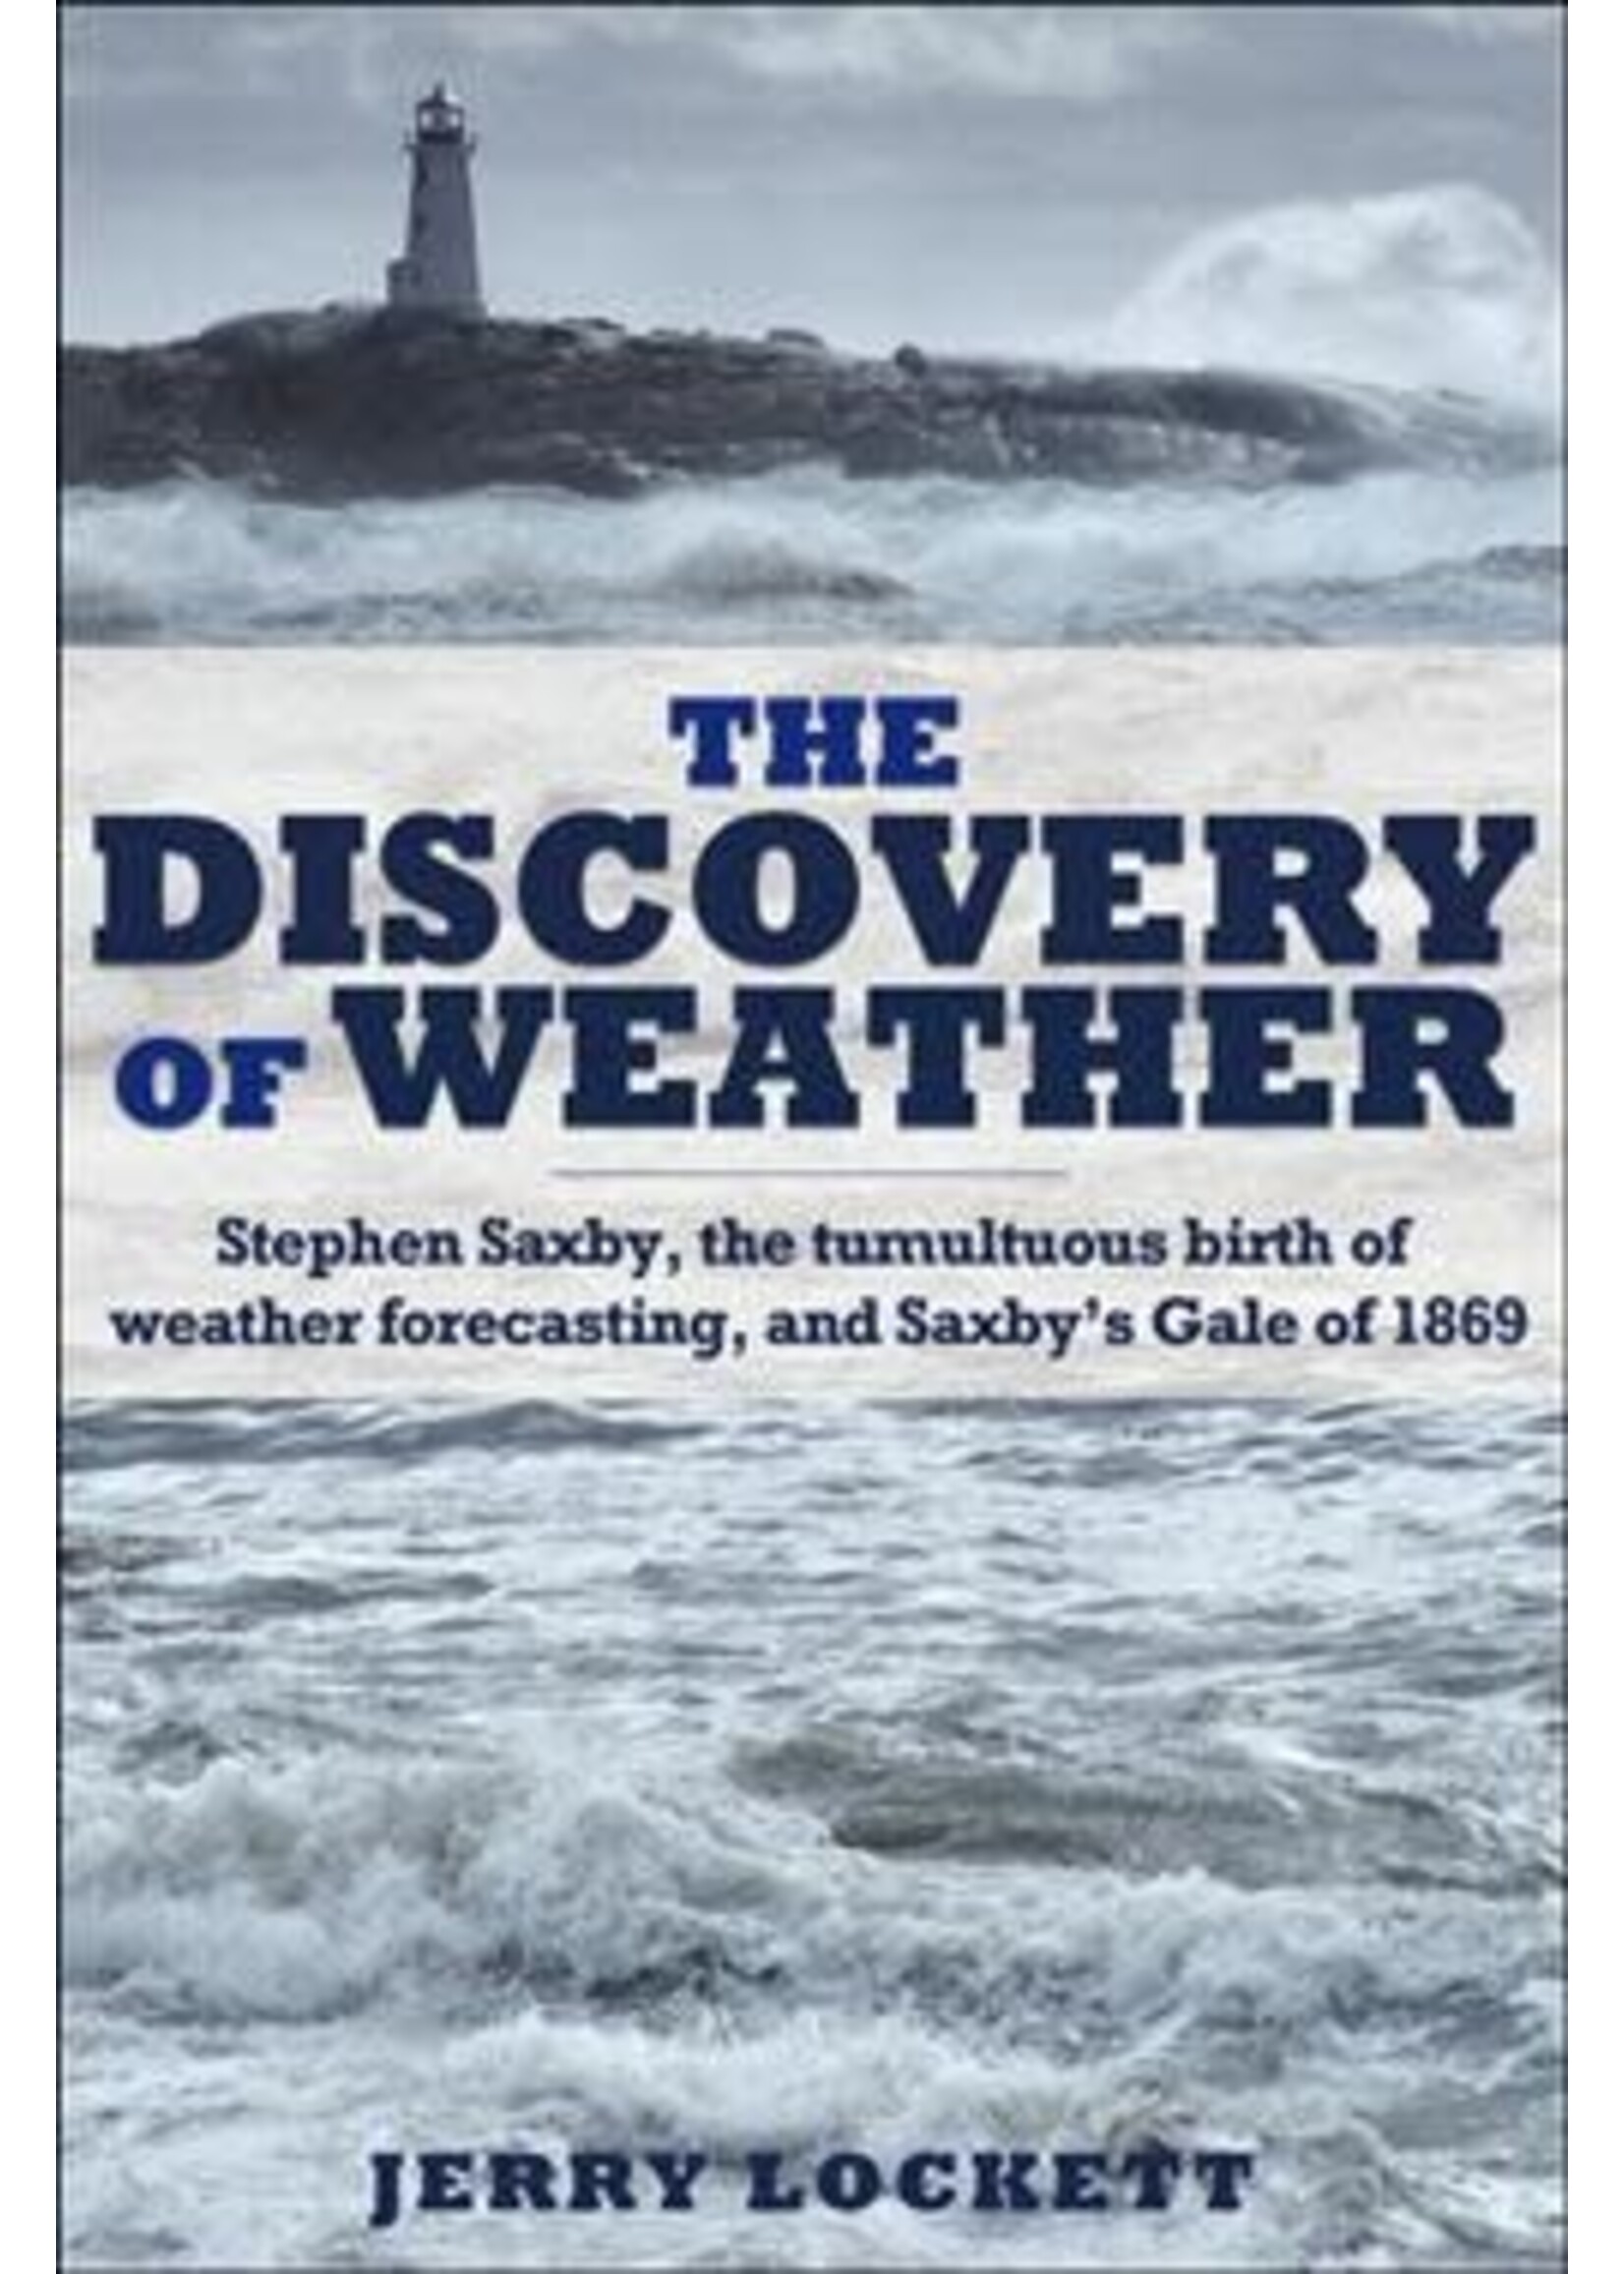 The Discovery of Weather: Stephen Saxby, the tumultuous birth of weather forecasting, and Saxby's Gale of 1869 by Jerry Lockett